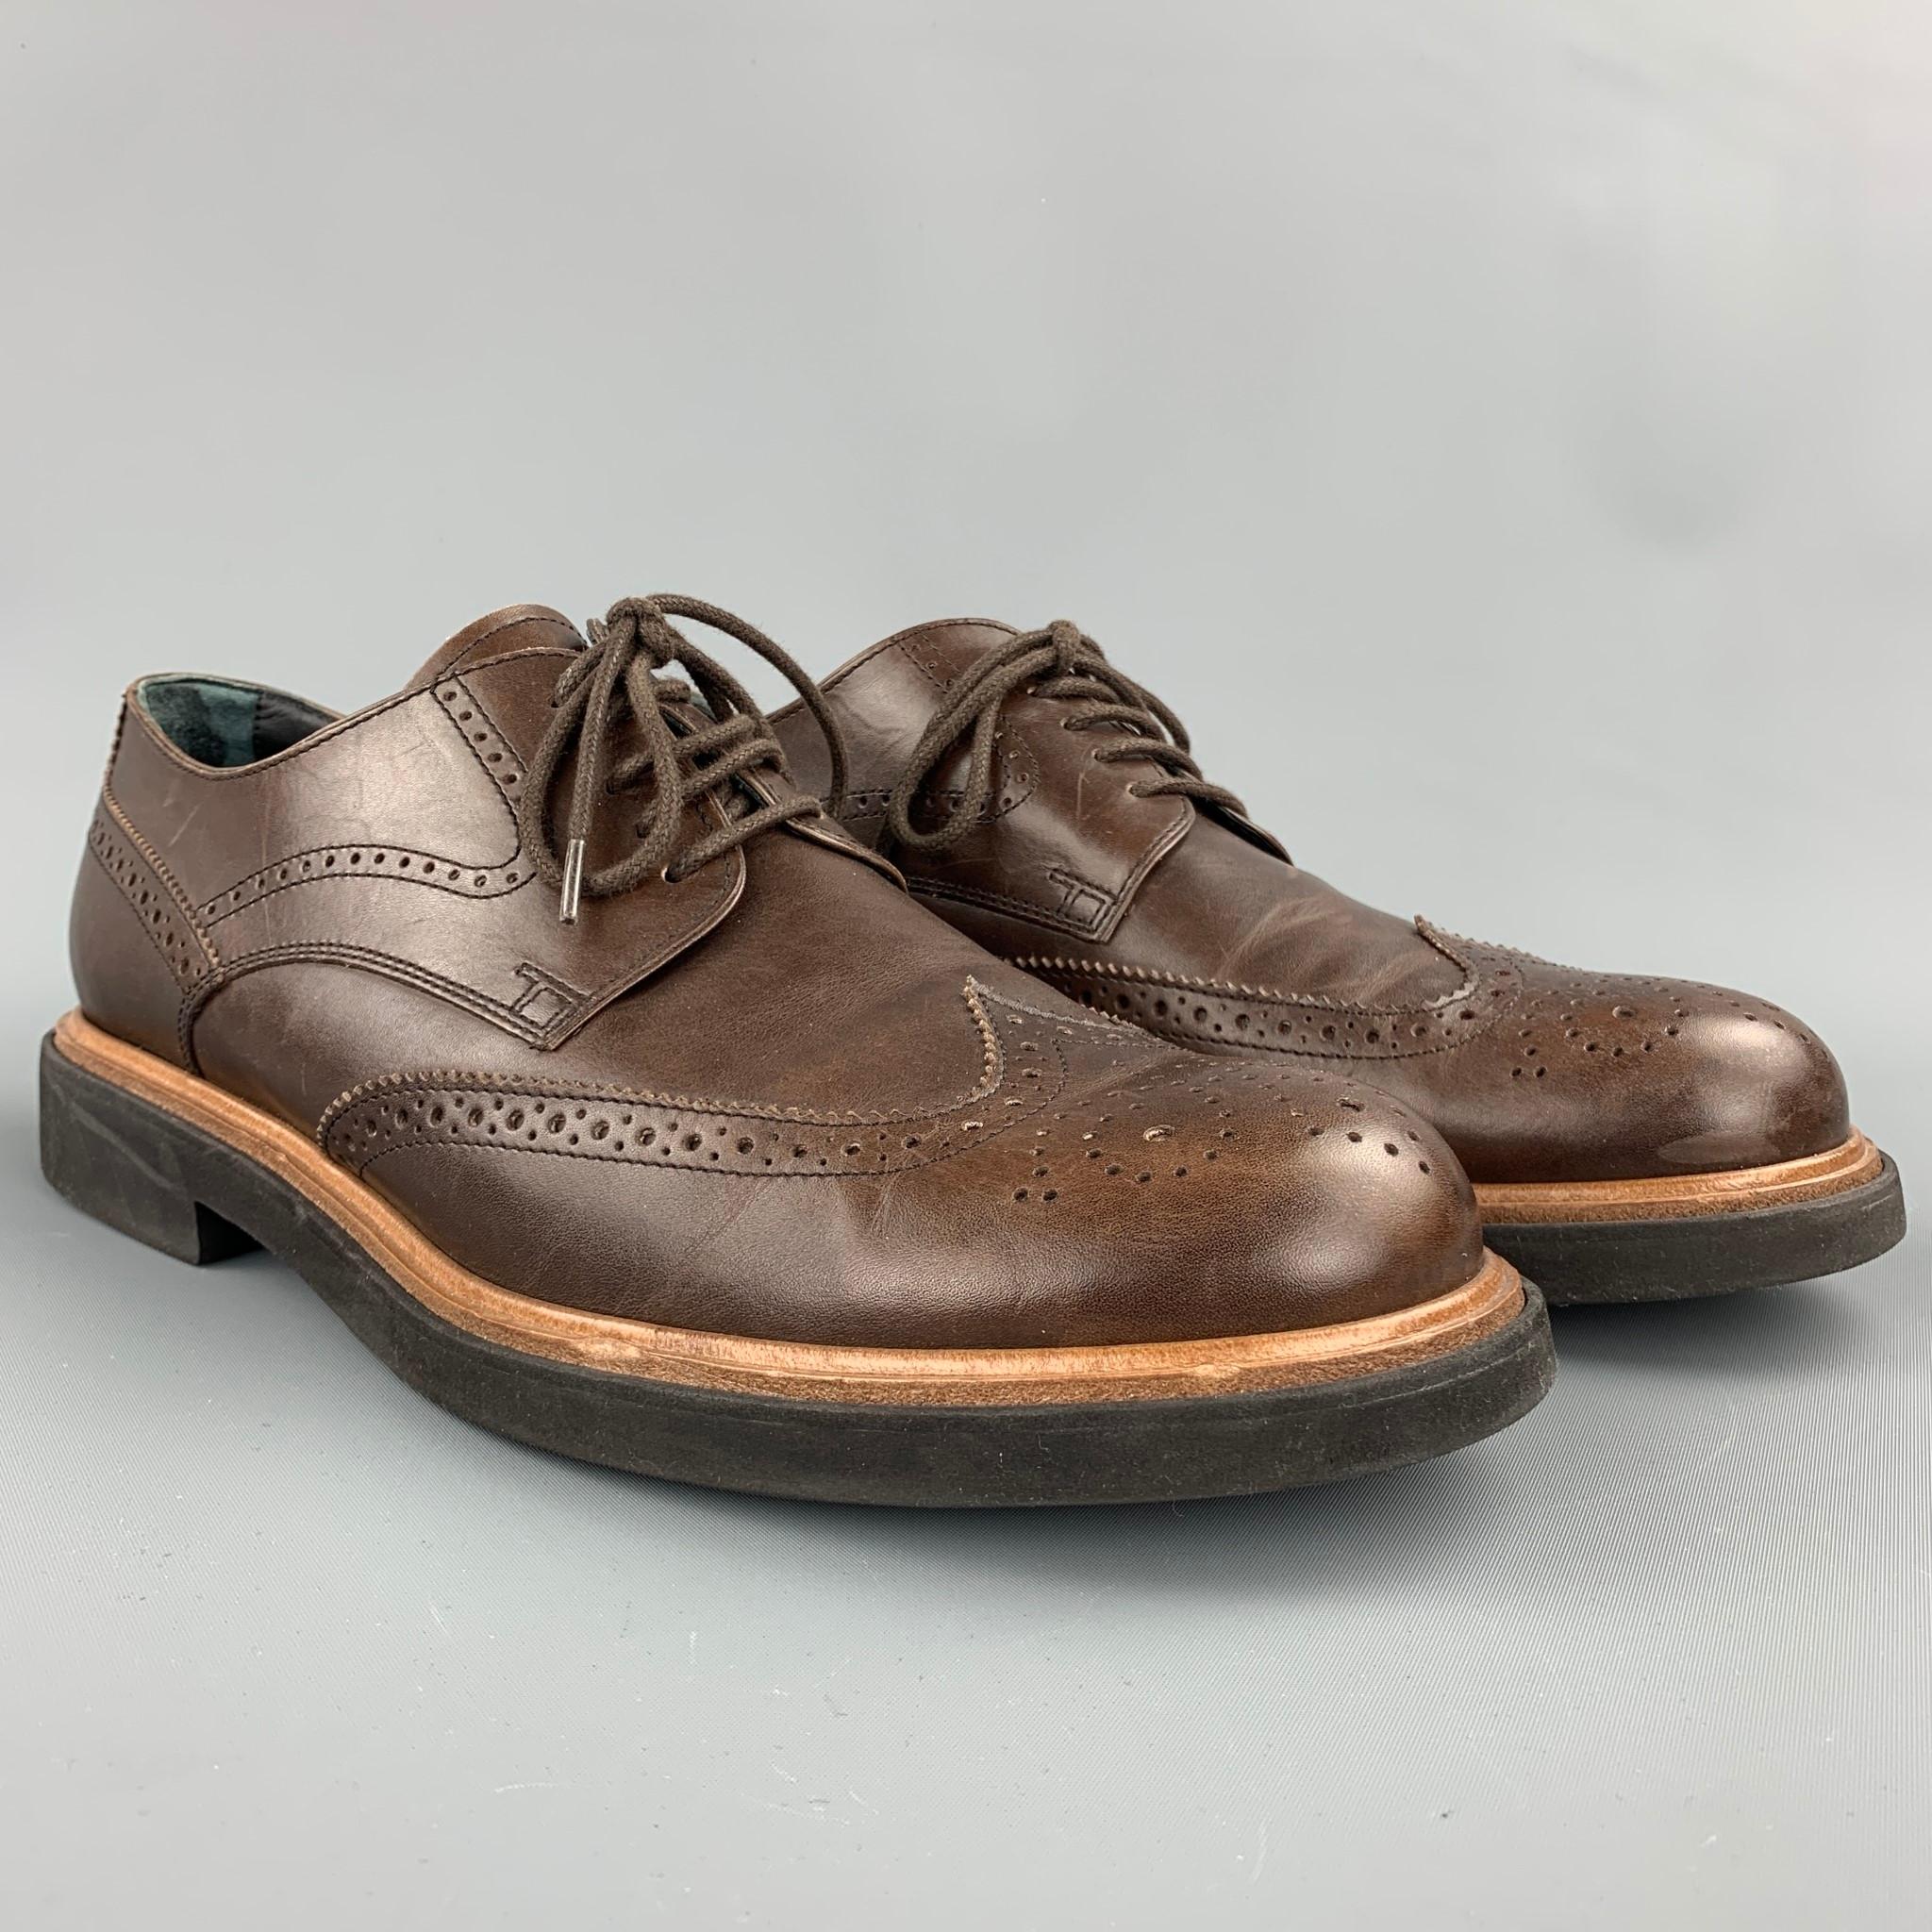 TOD'S lace up shoes comes in a brown perforated leather featuring a wingtip style and a rubber sole. Minor wear. Made in Italy.

Very Good Pre-Owned Condition.
Marked: 9.5

Outsole:

12 in. x 5 in. 